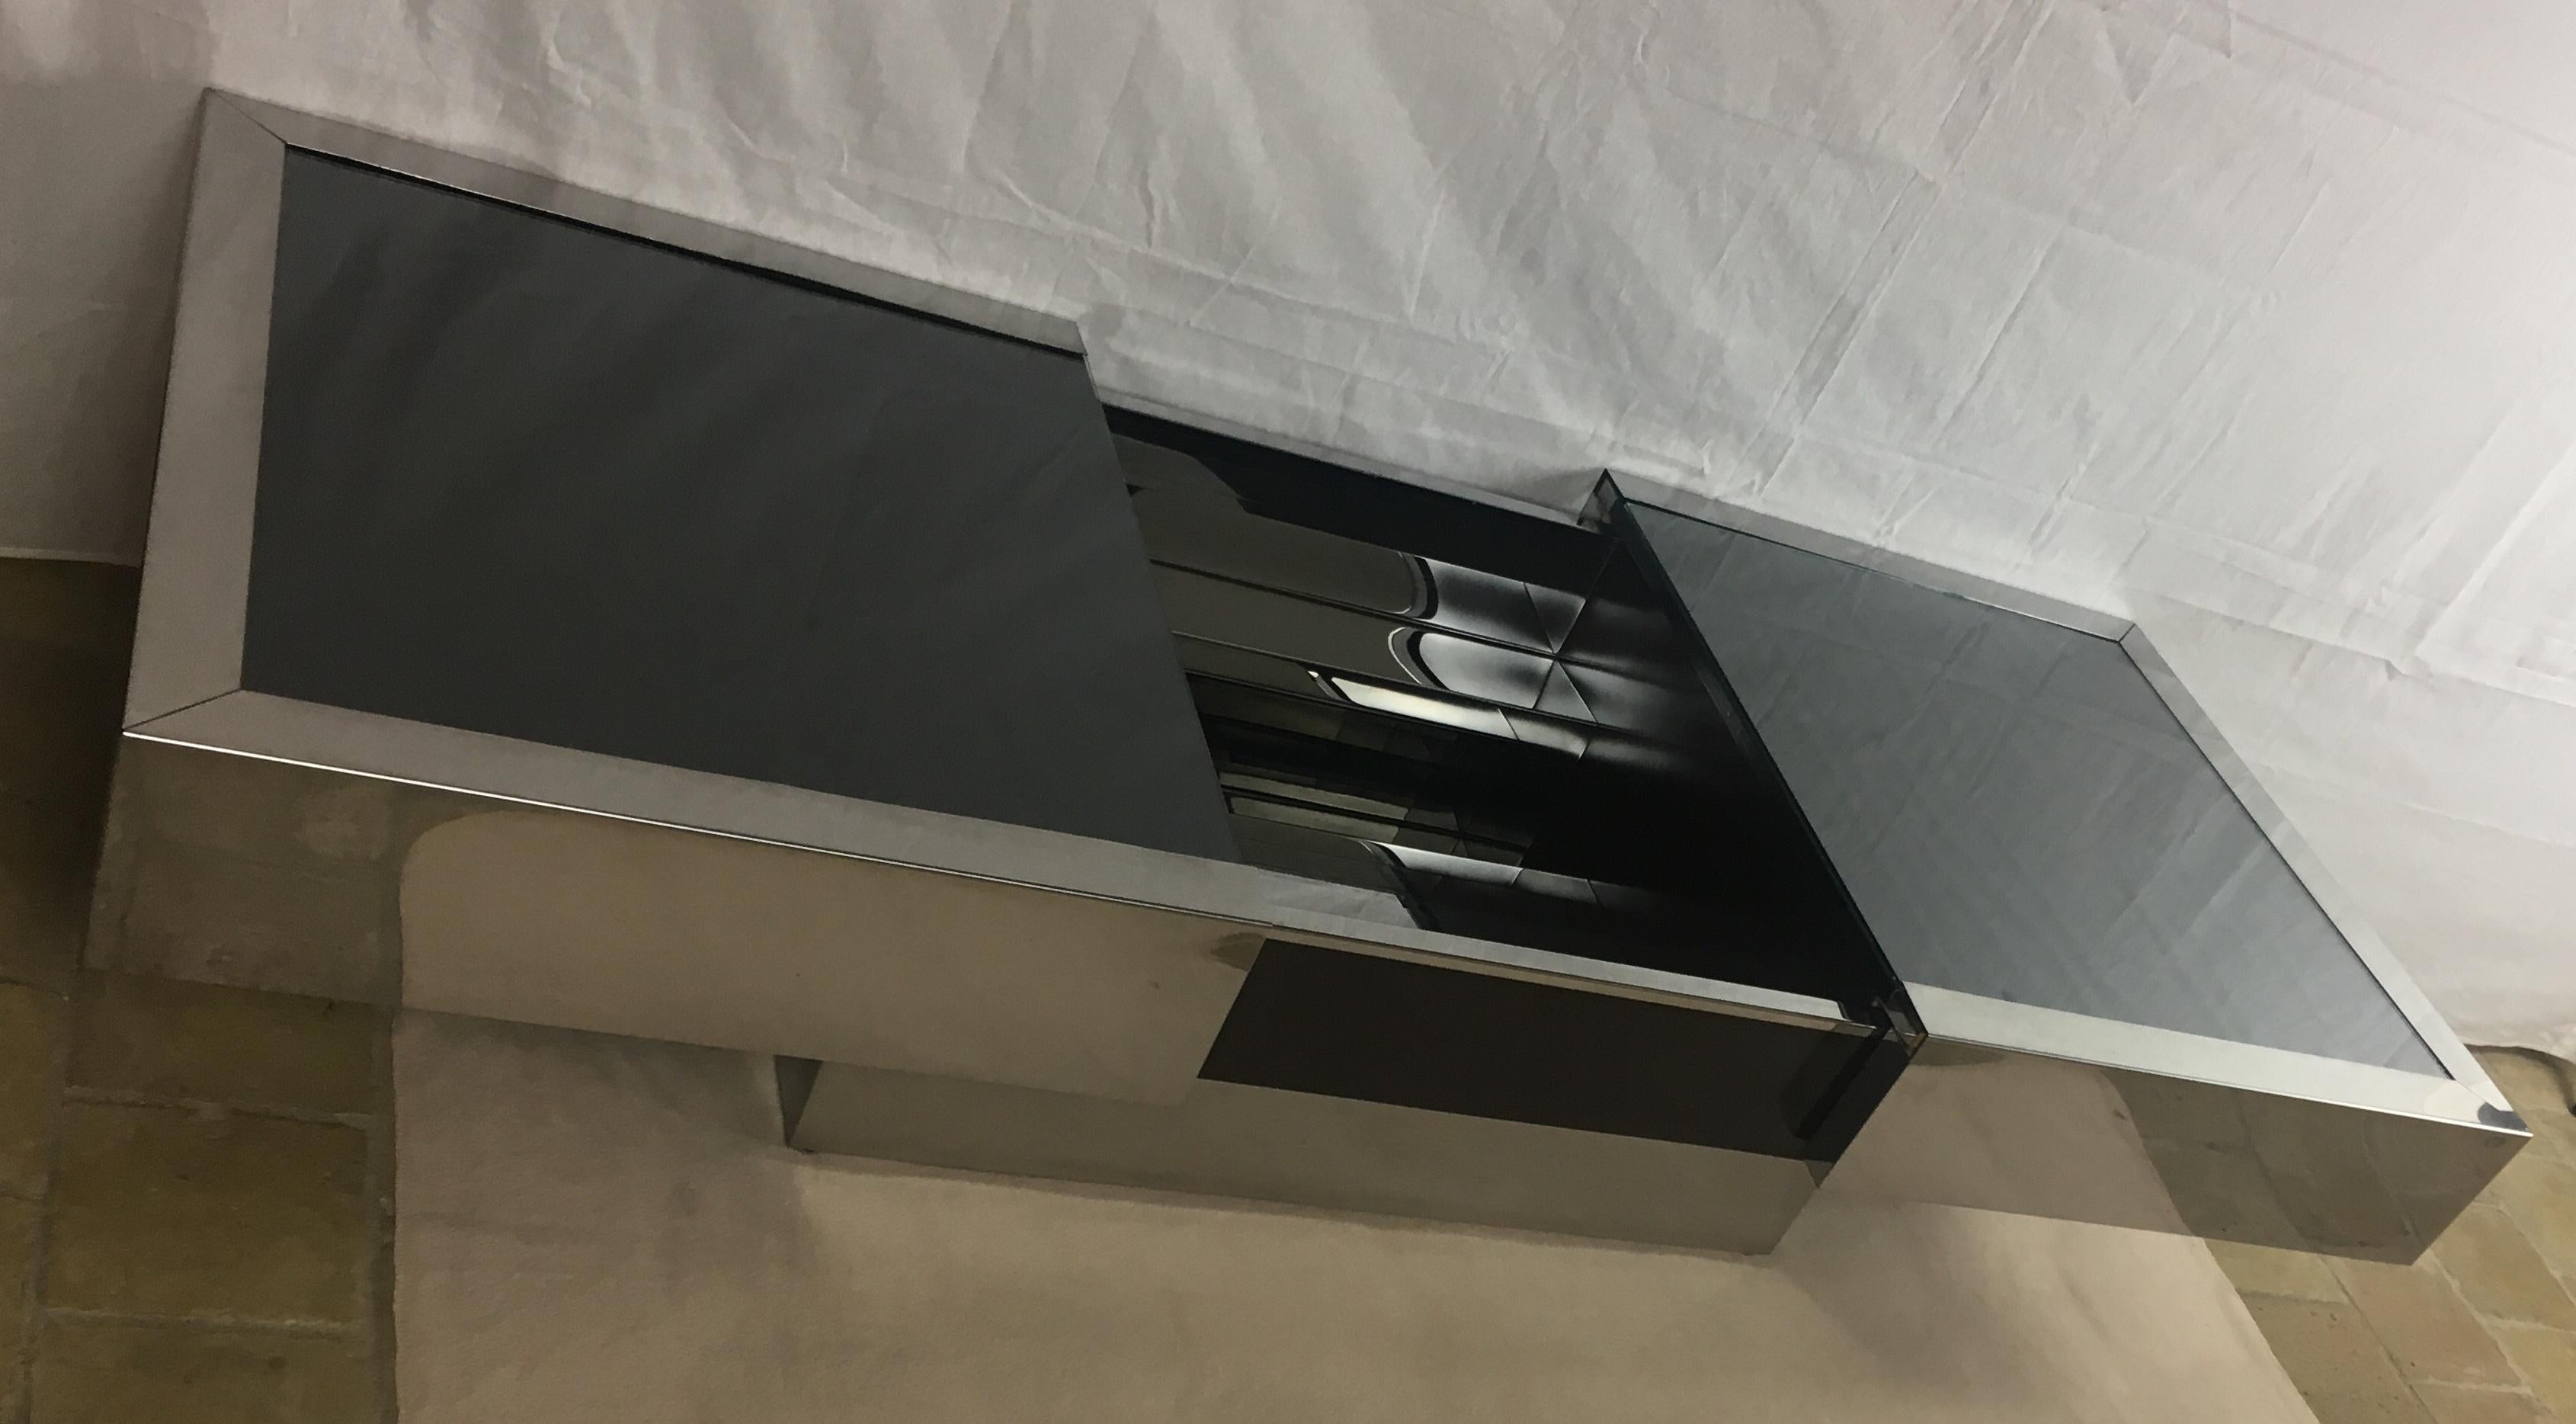 Coffee table, in stainless steel and glass, Italy, 1970s. 
New top black mirror glass has been installed, photos are attached.

This extendable cocktail table in stainless steel and black colored glass shows basic minimalist lines and geometric